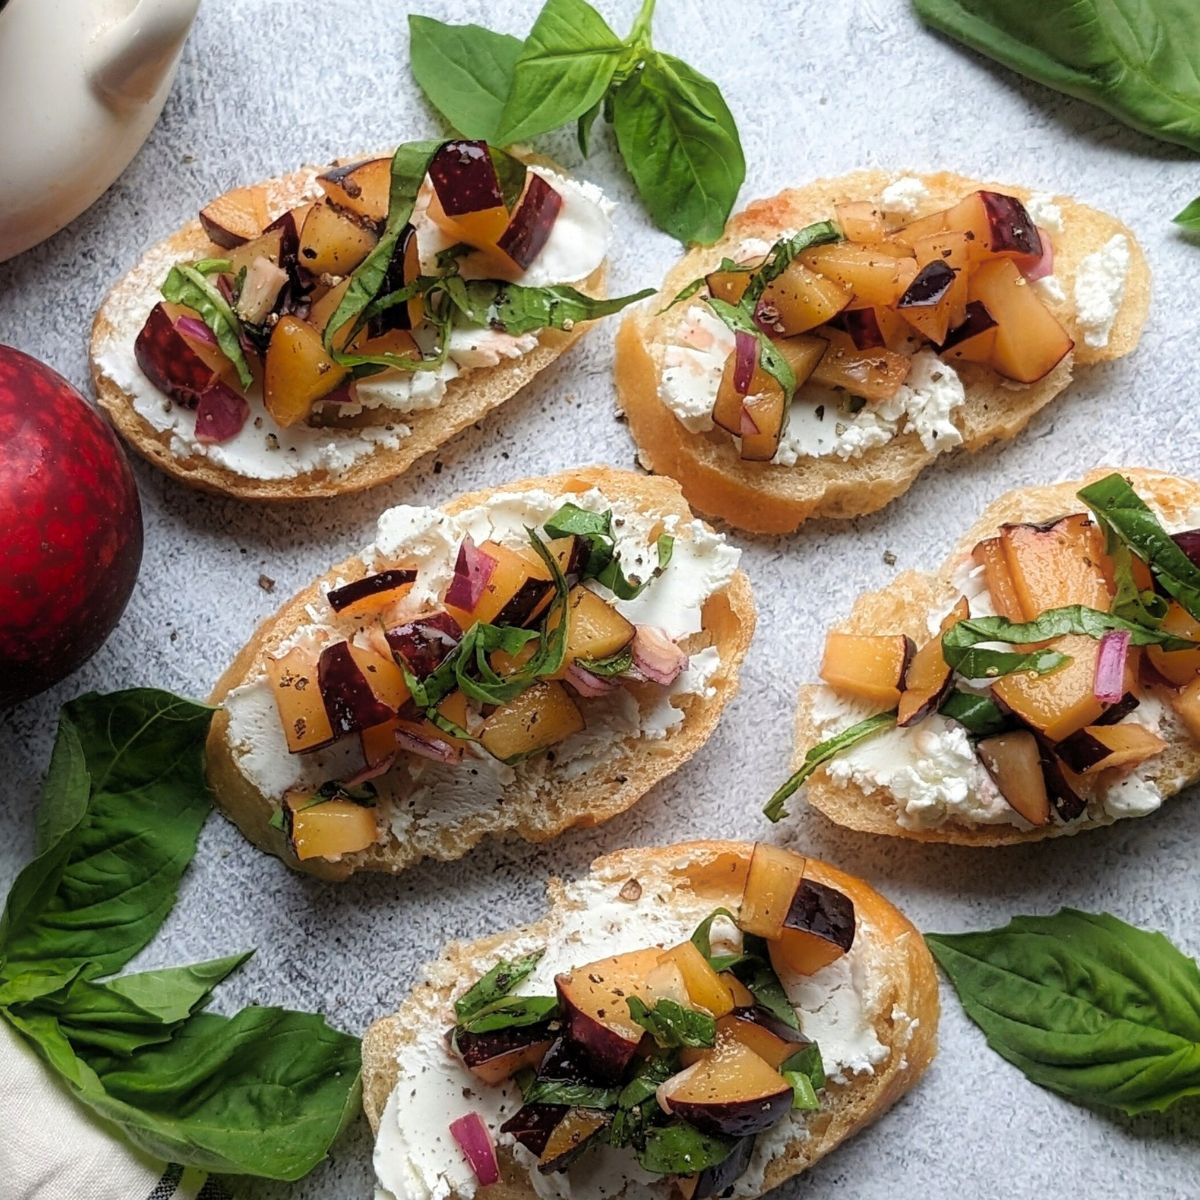 plum bruschetta with goat cheese and honey on toasted baguette slices with fresh basil